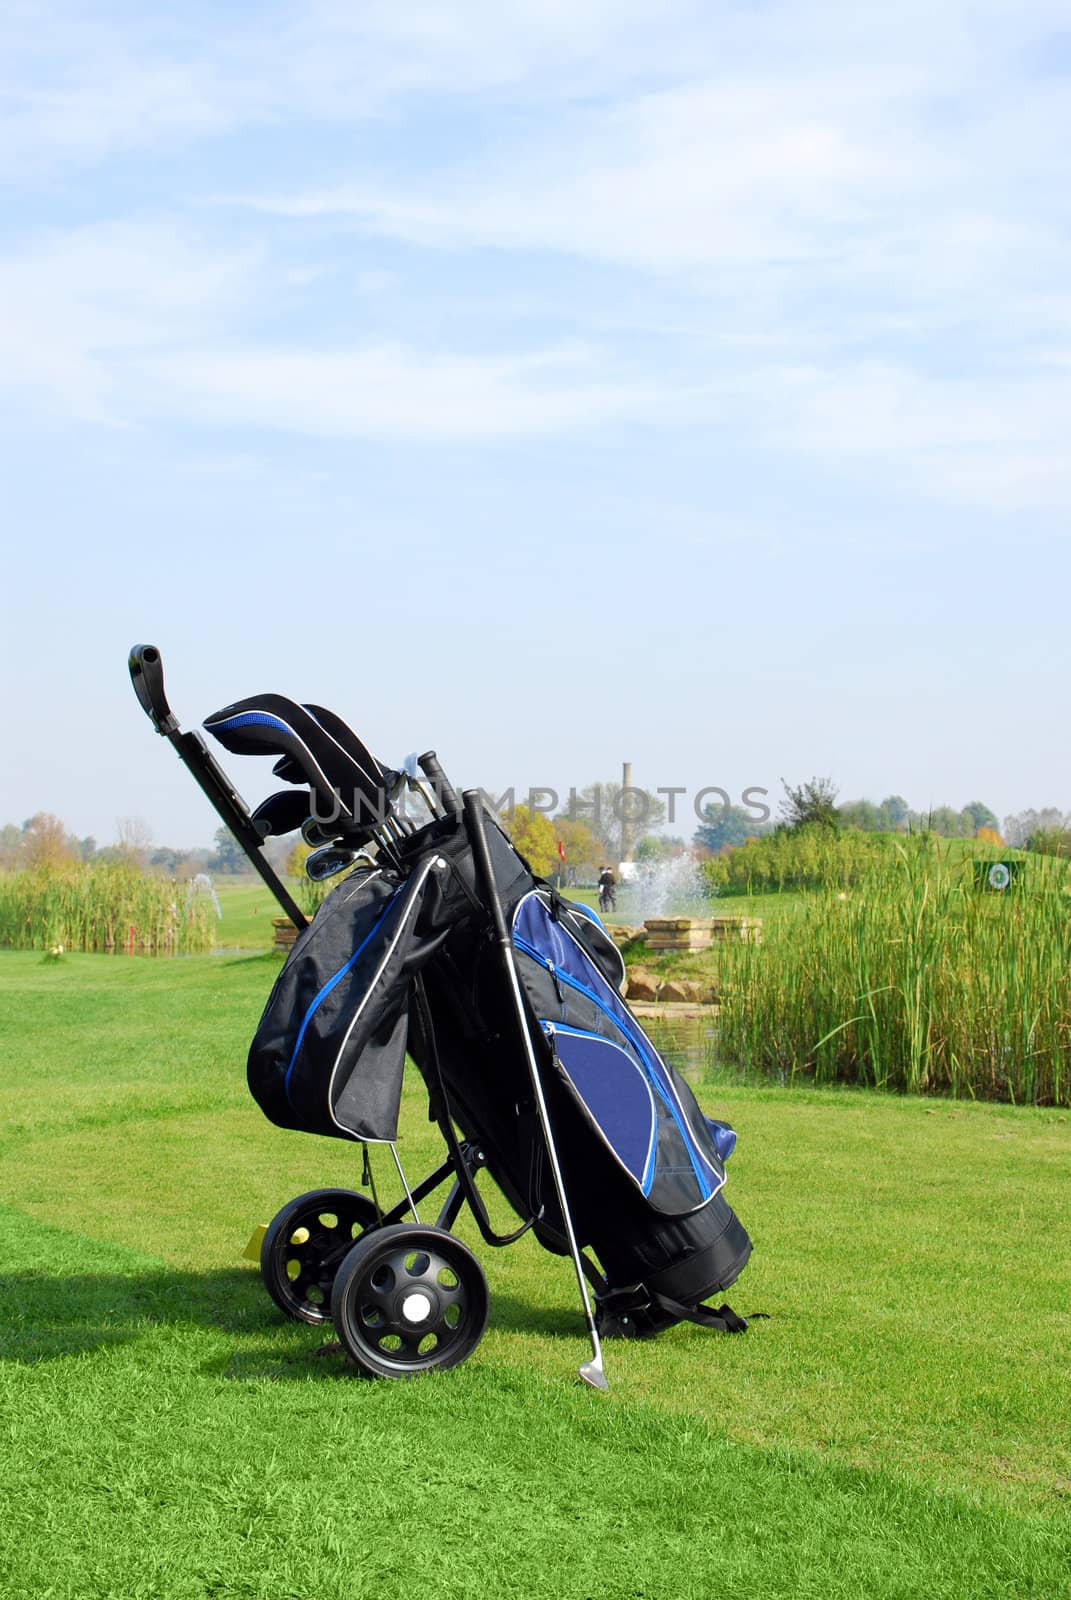 Golf scene with bag and golf club